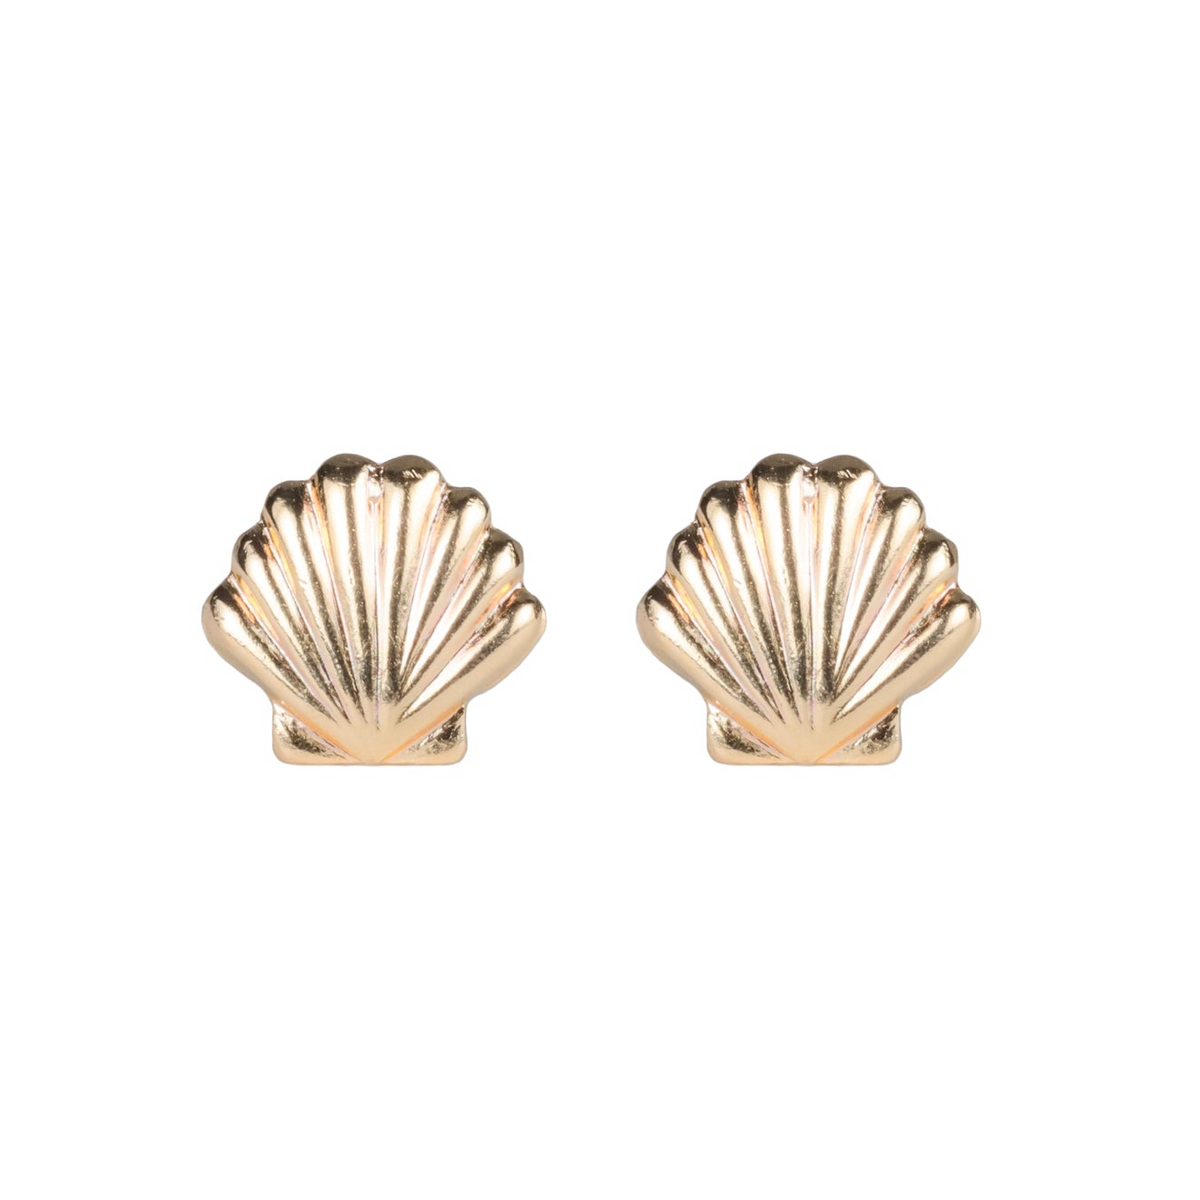 a pair of gold seashell earrings on a white background